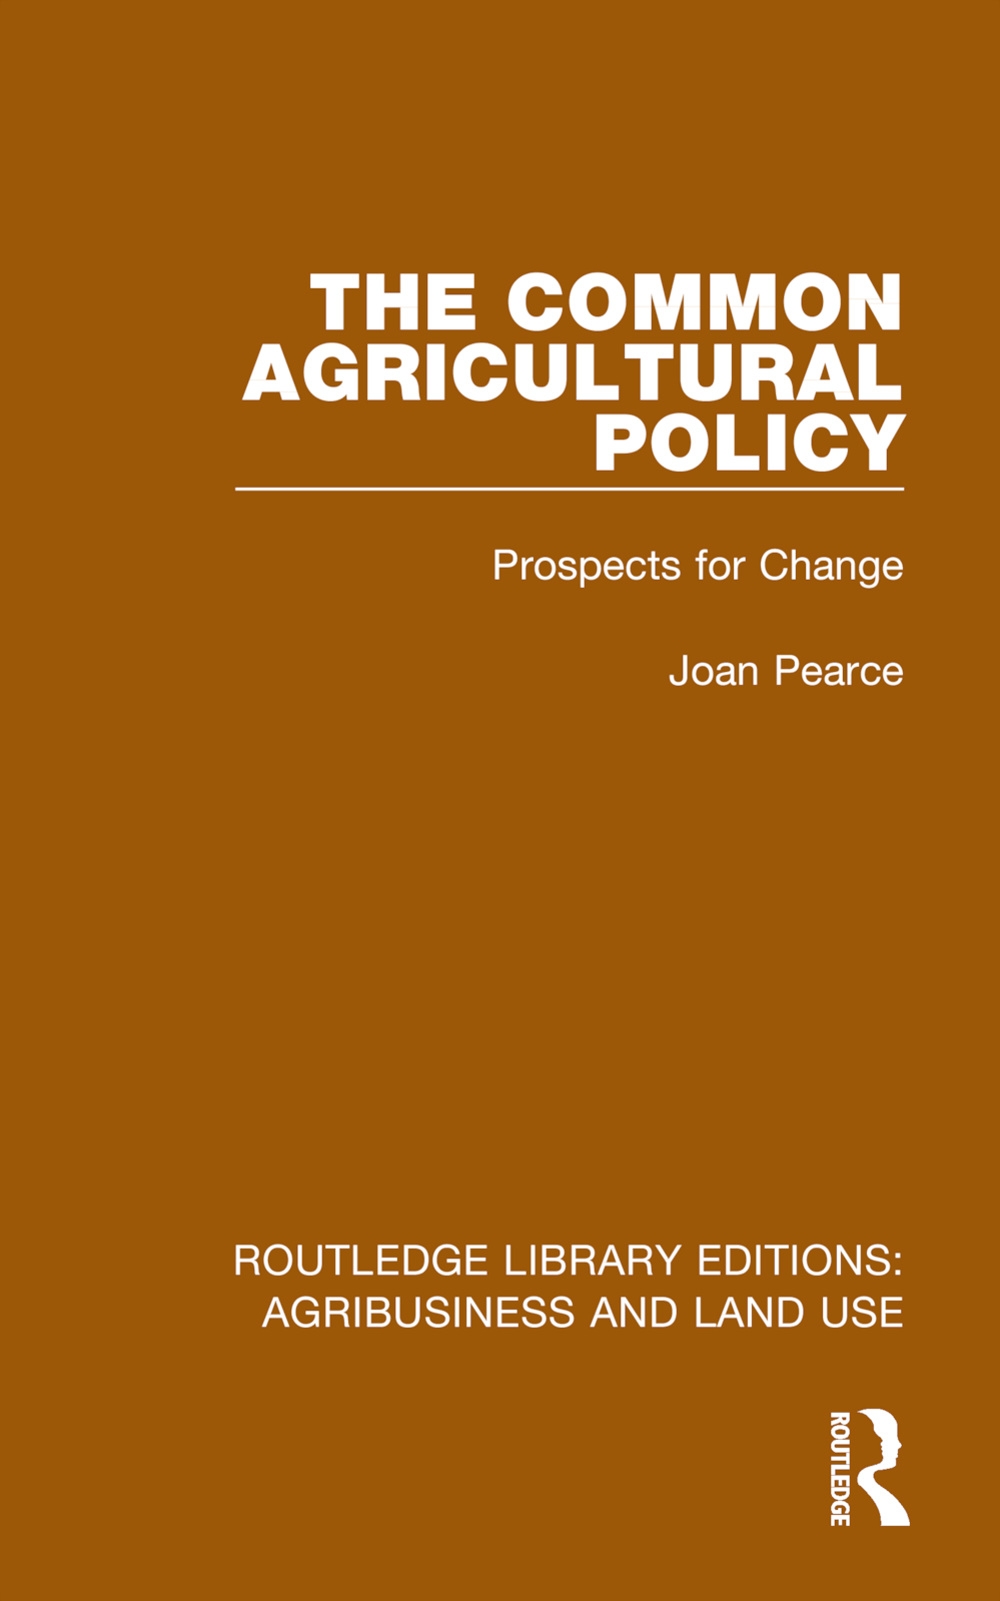 The Common Agricultural Policy: Prospects for Change